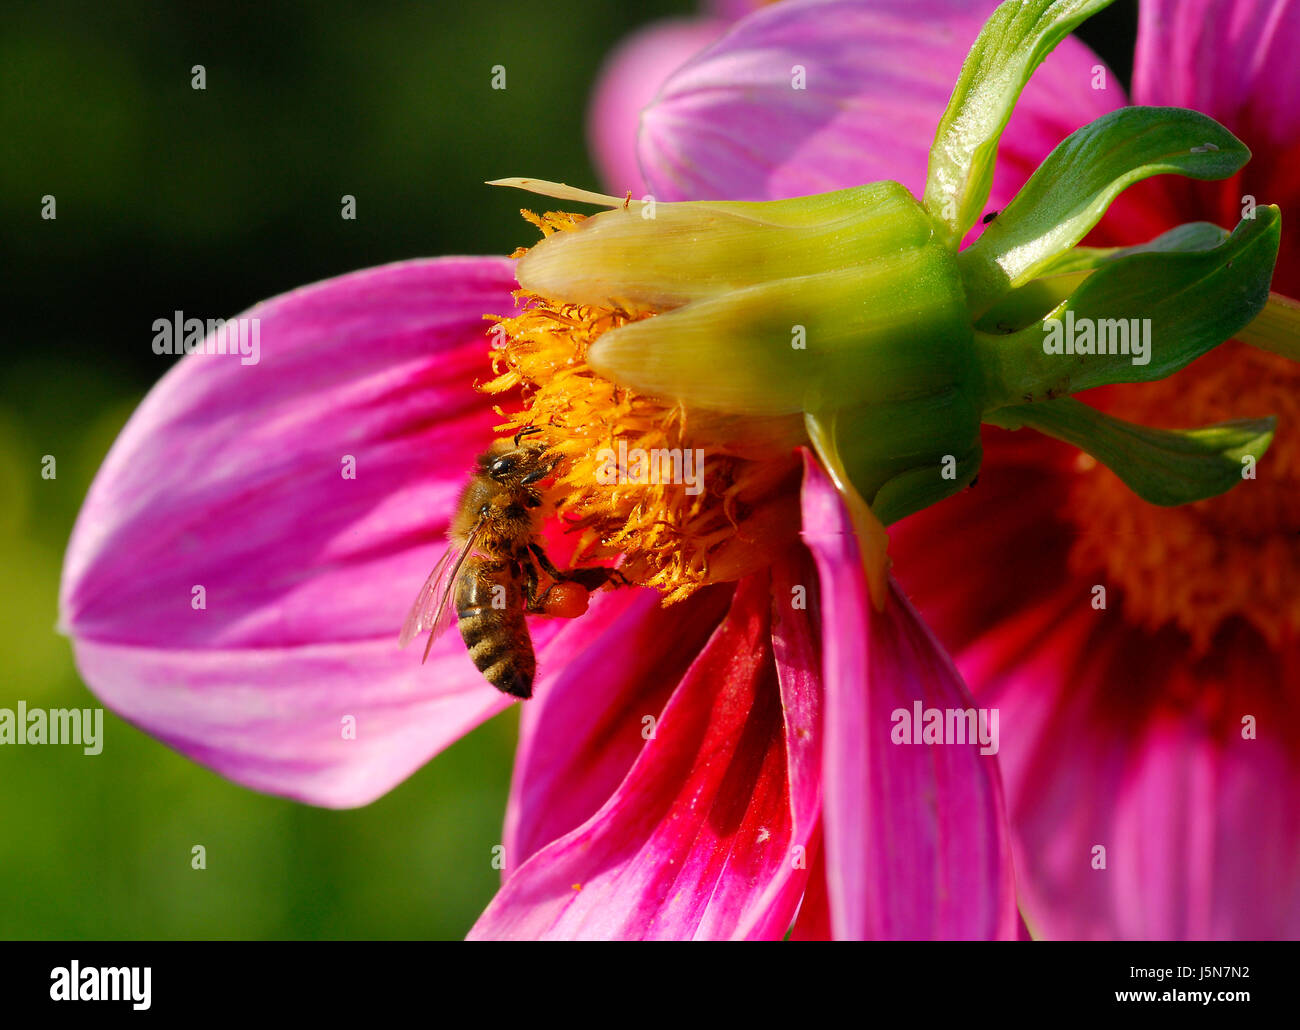 macro close-up macro admission close up view flower plant insects bloom blossom Stock Photo